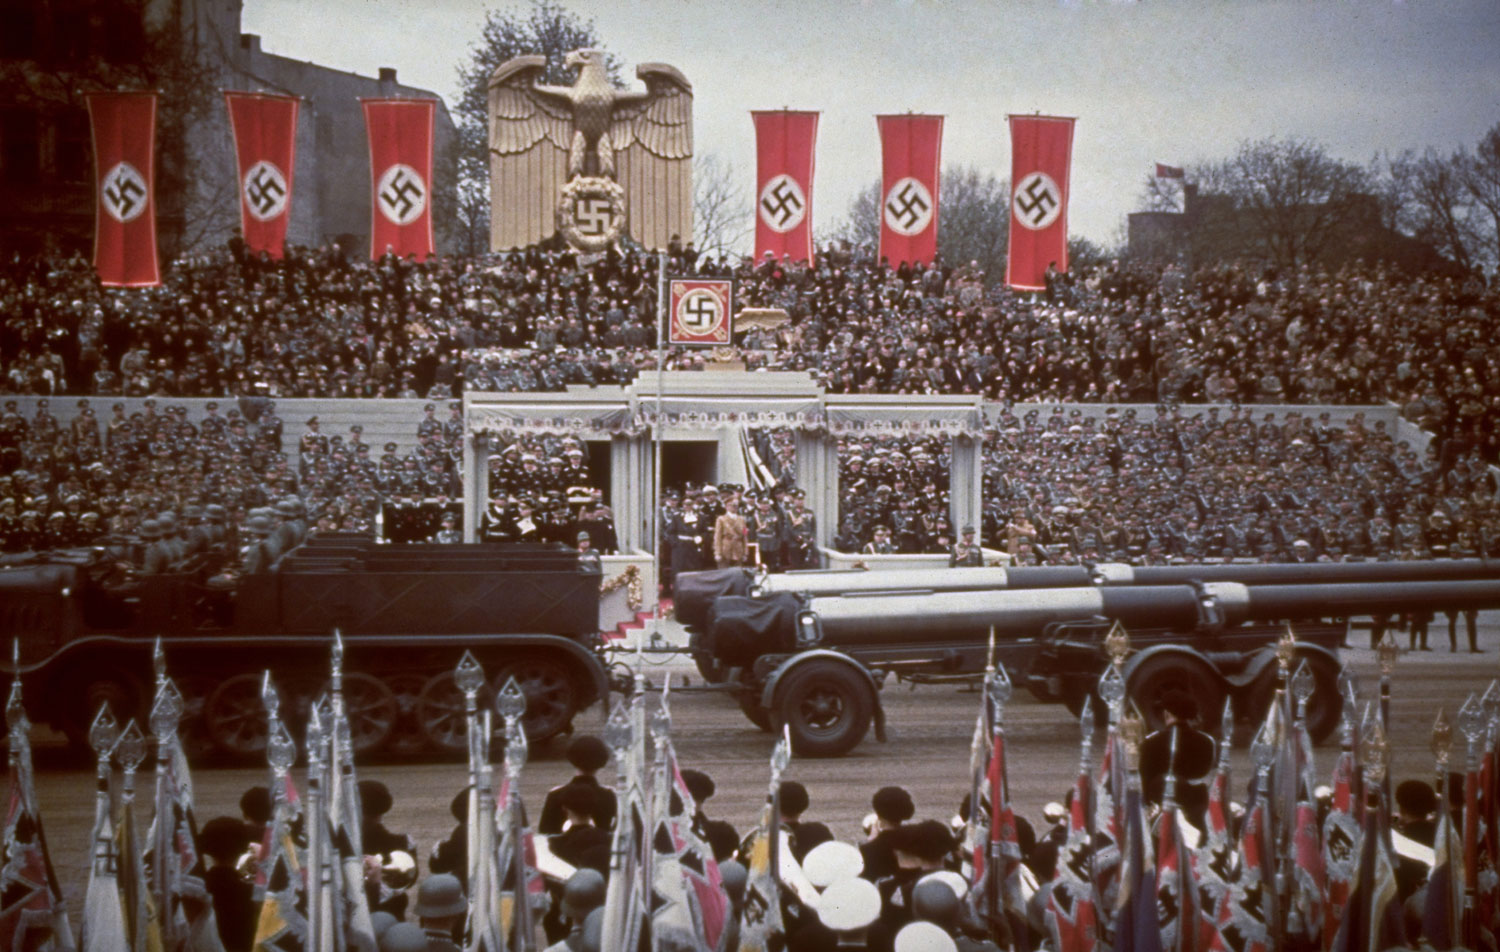 Heavy artillery passes the reviewing stand during a military parade in celebration of Adolf Hitler's 50th birthday, Berlin, April 20, 1939.